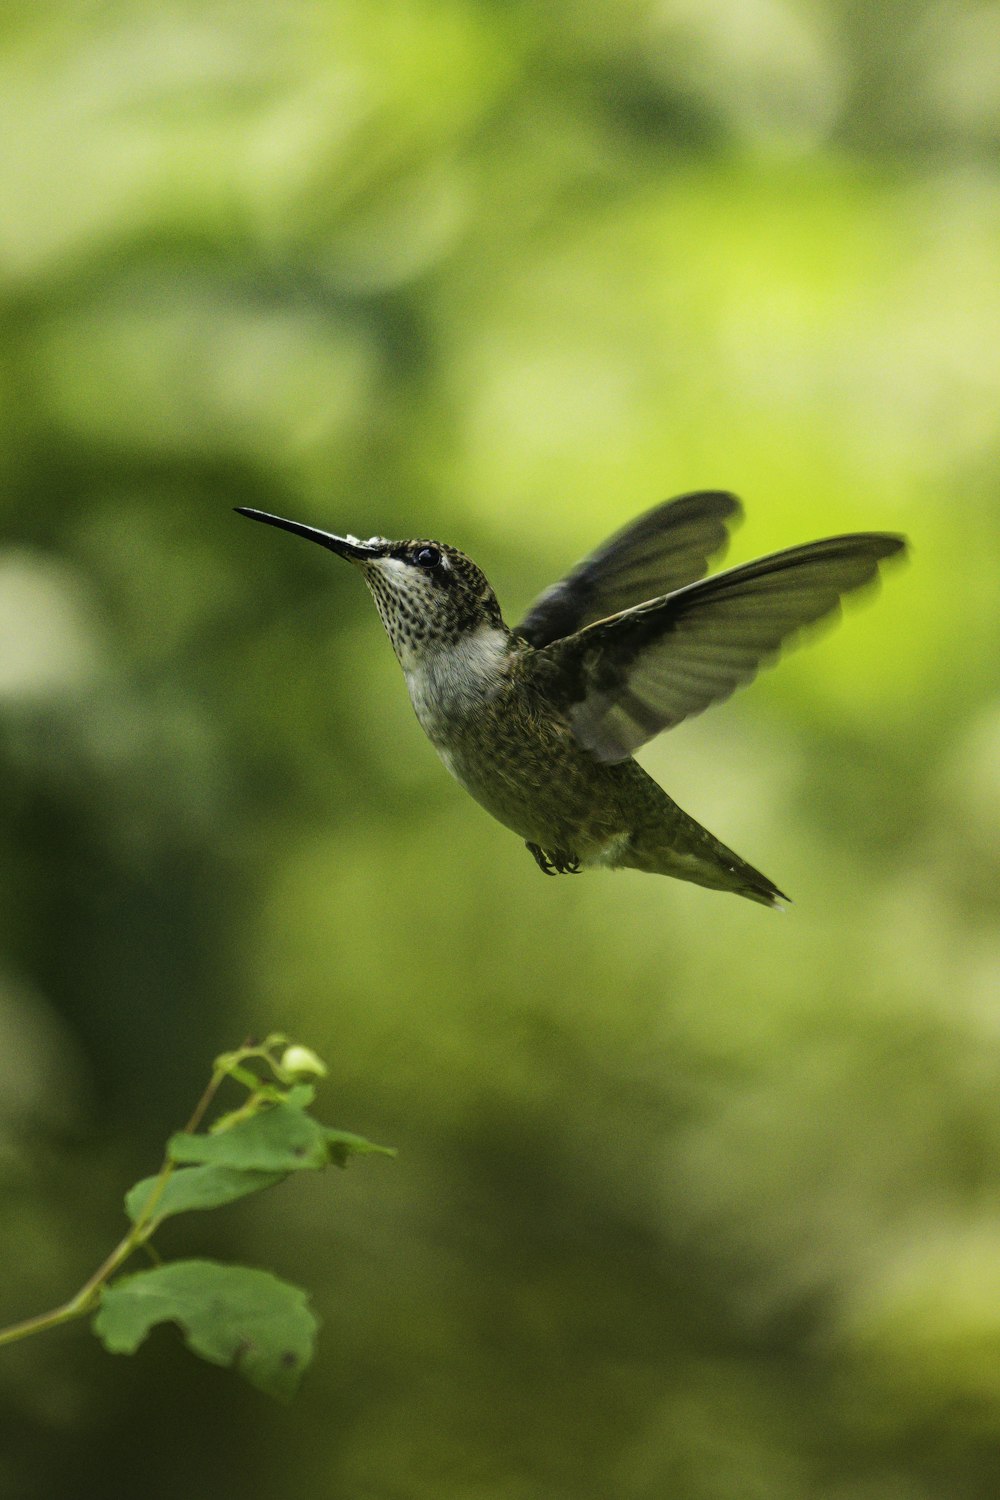 a hummingbird flying over a green leafy branch